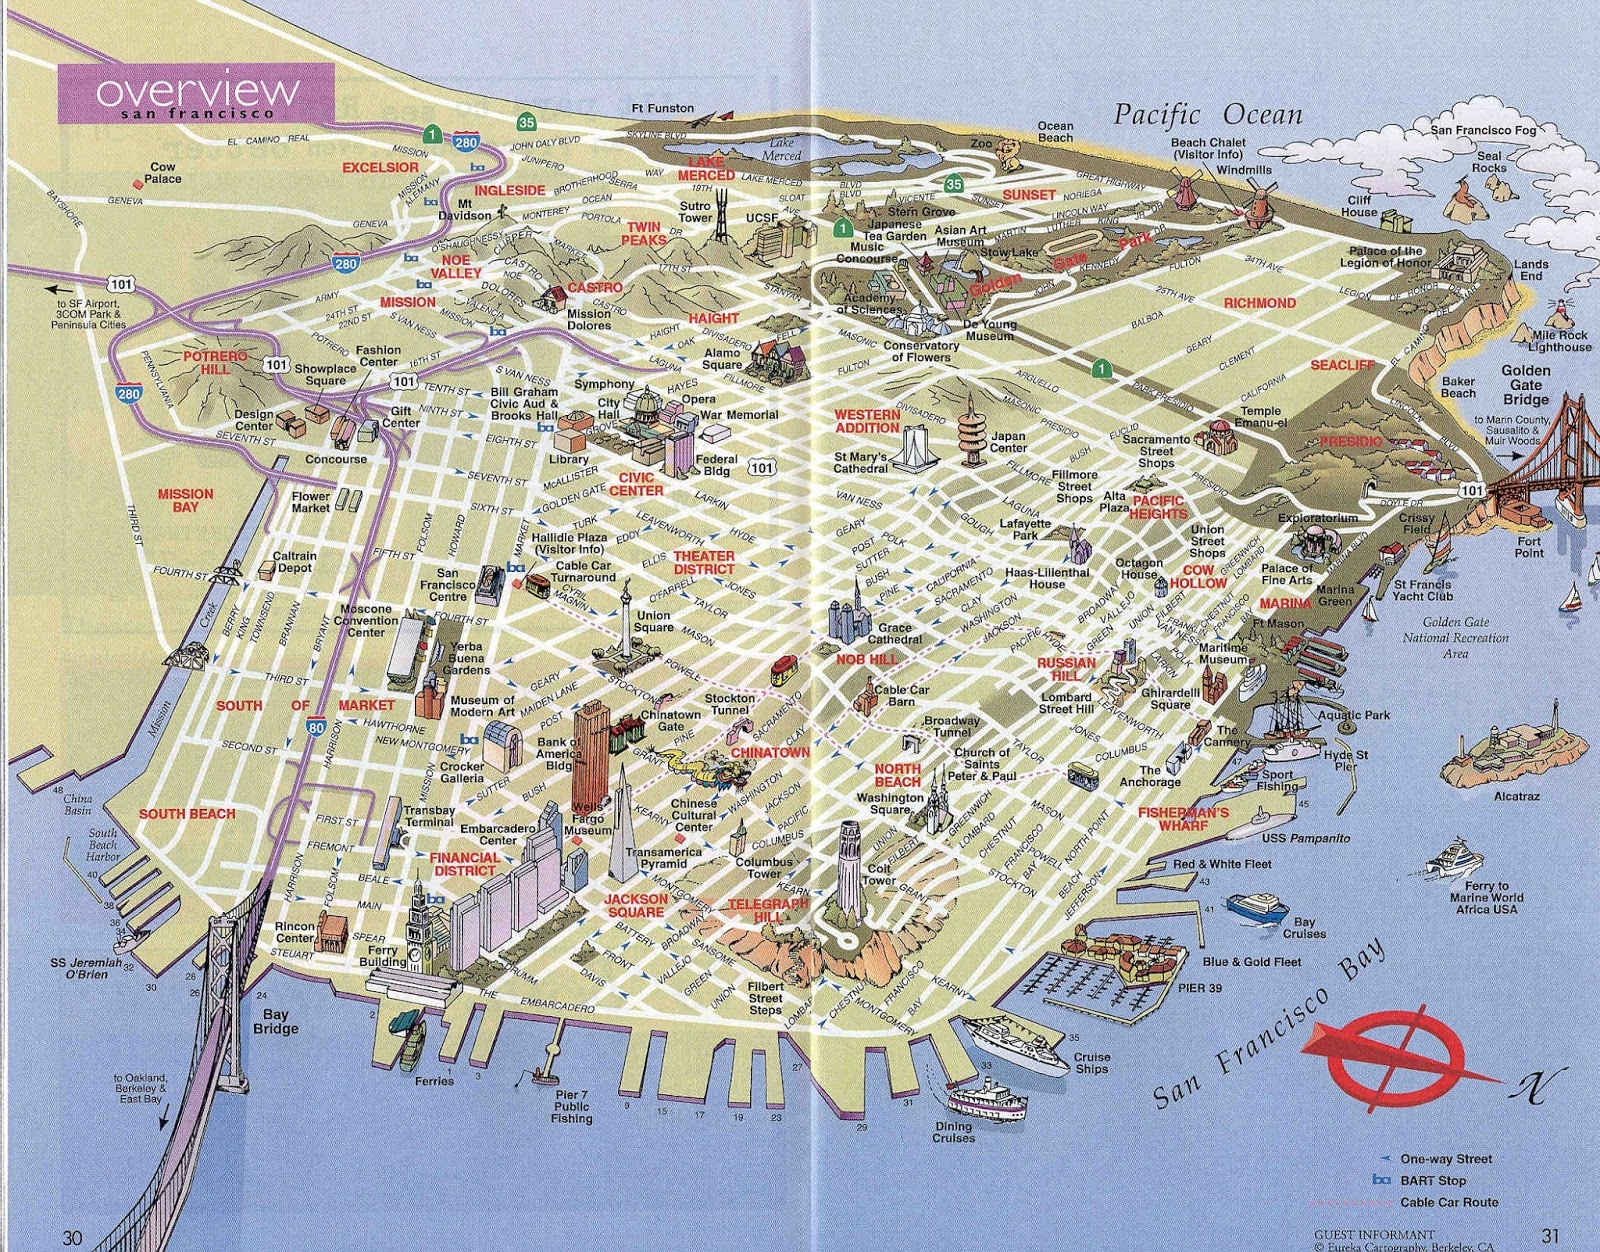 San francisco compromising - on quality of life issues - more with a $10 bi...